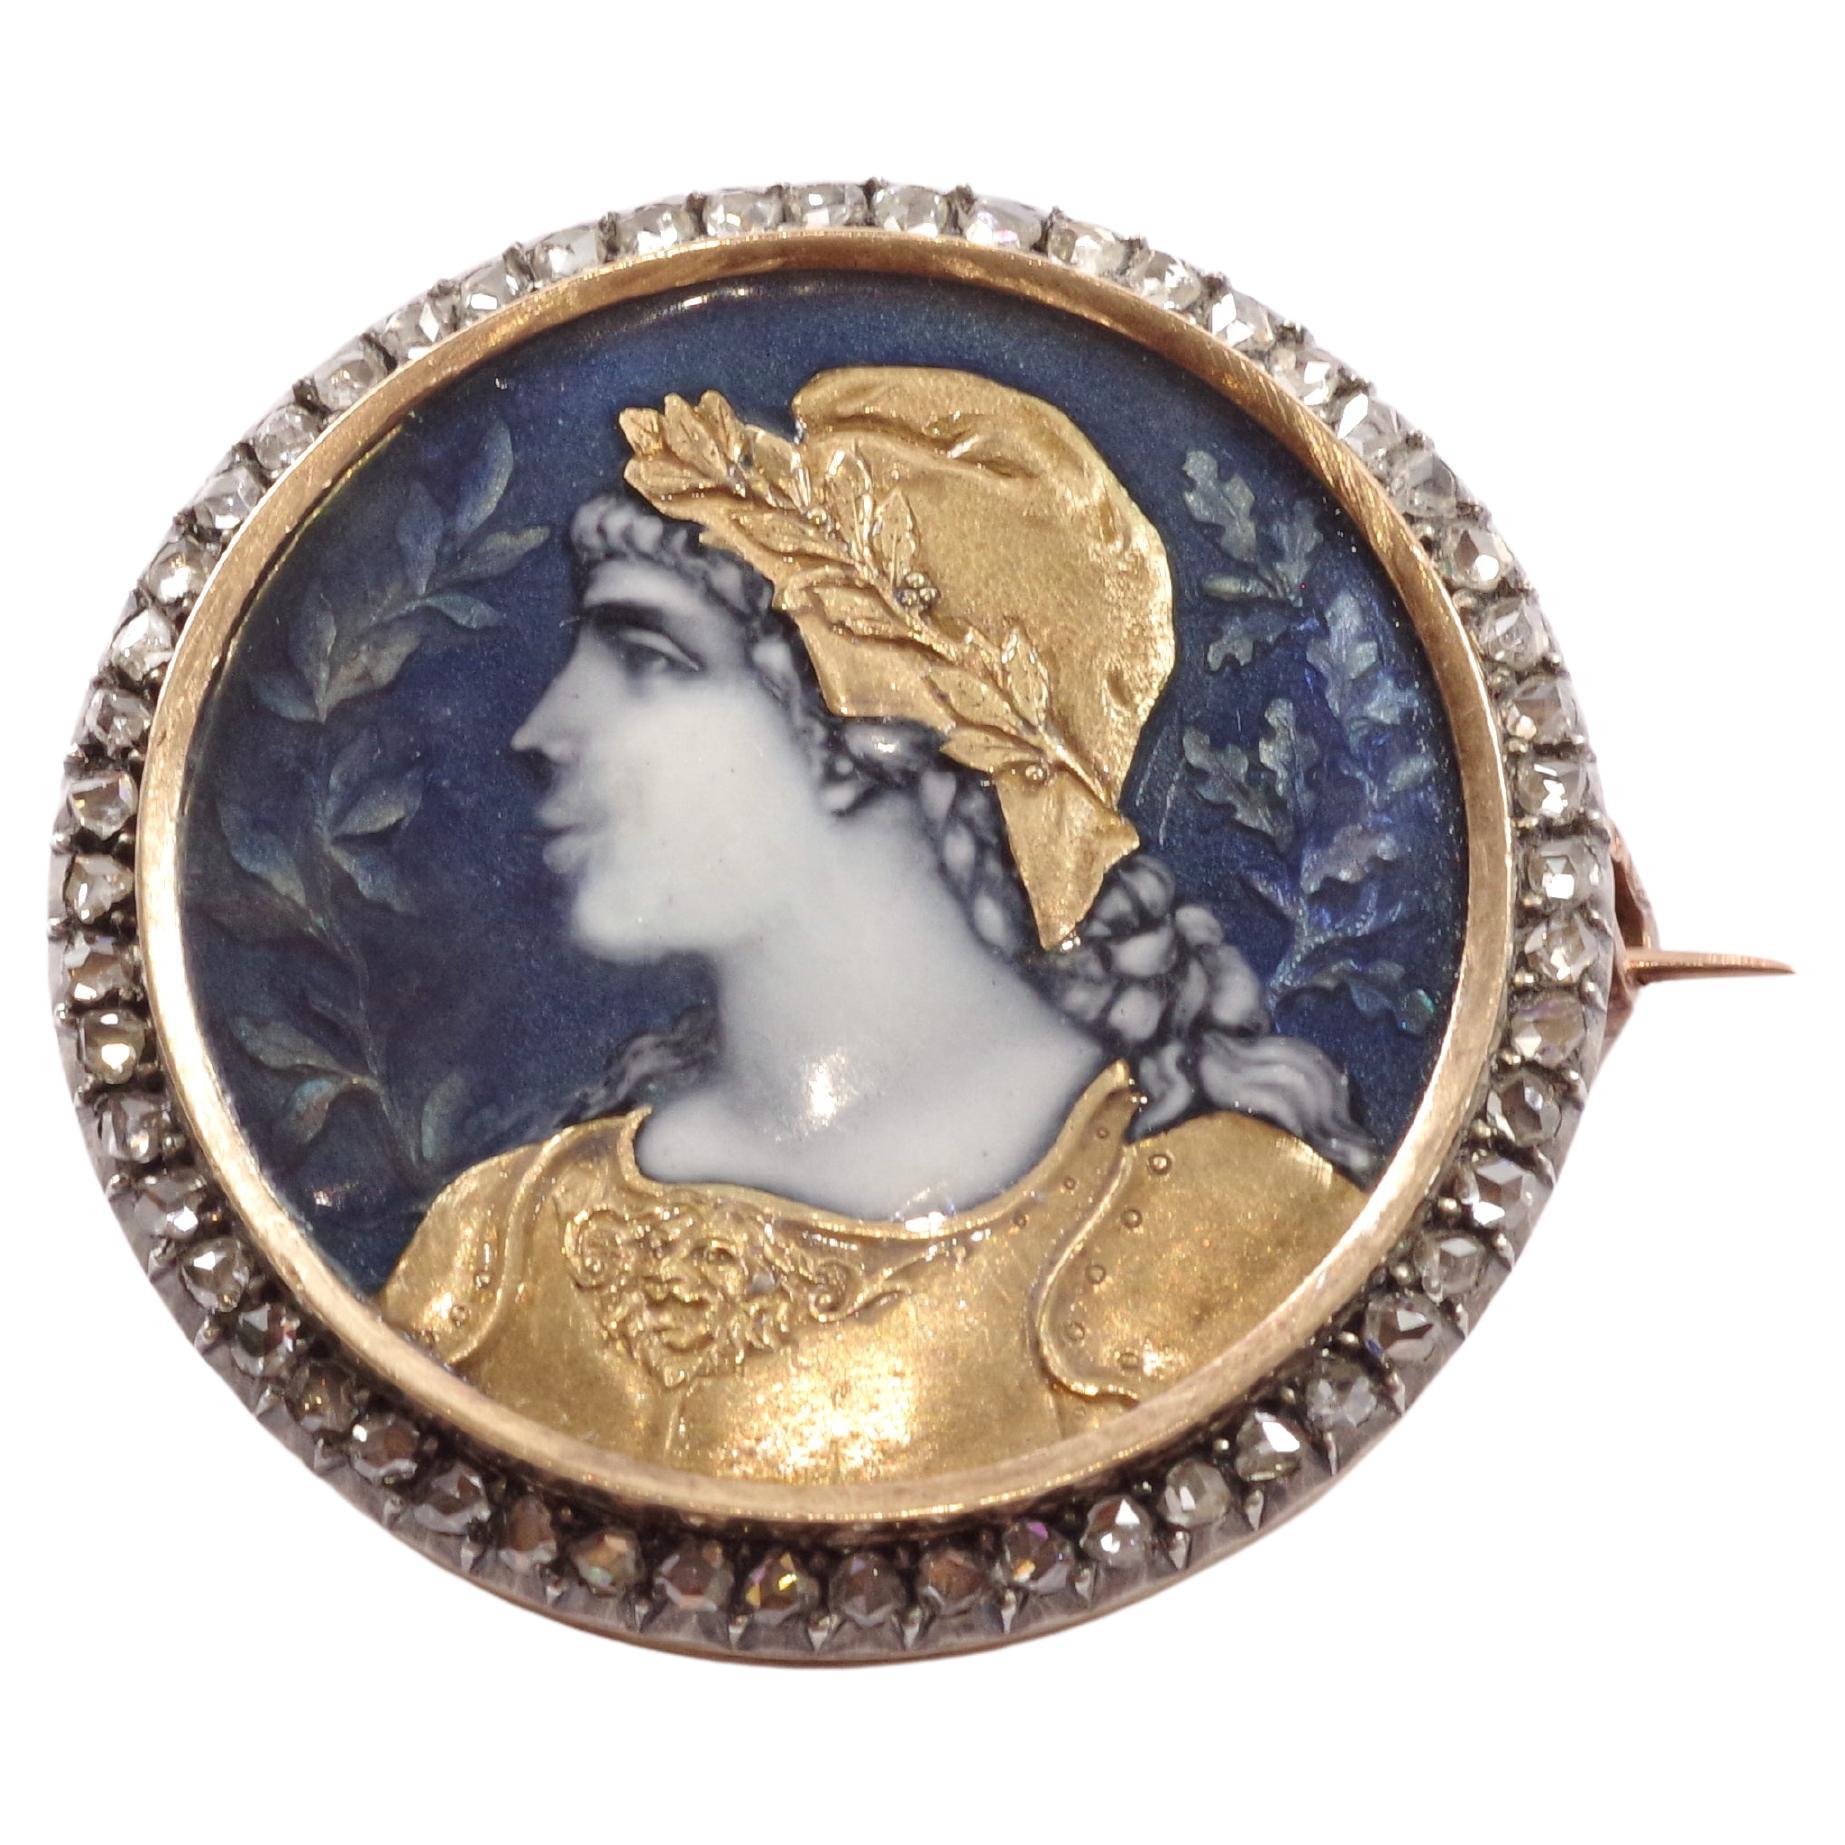 Antique Victorian Marianne brooch in gold and silver